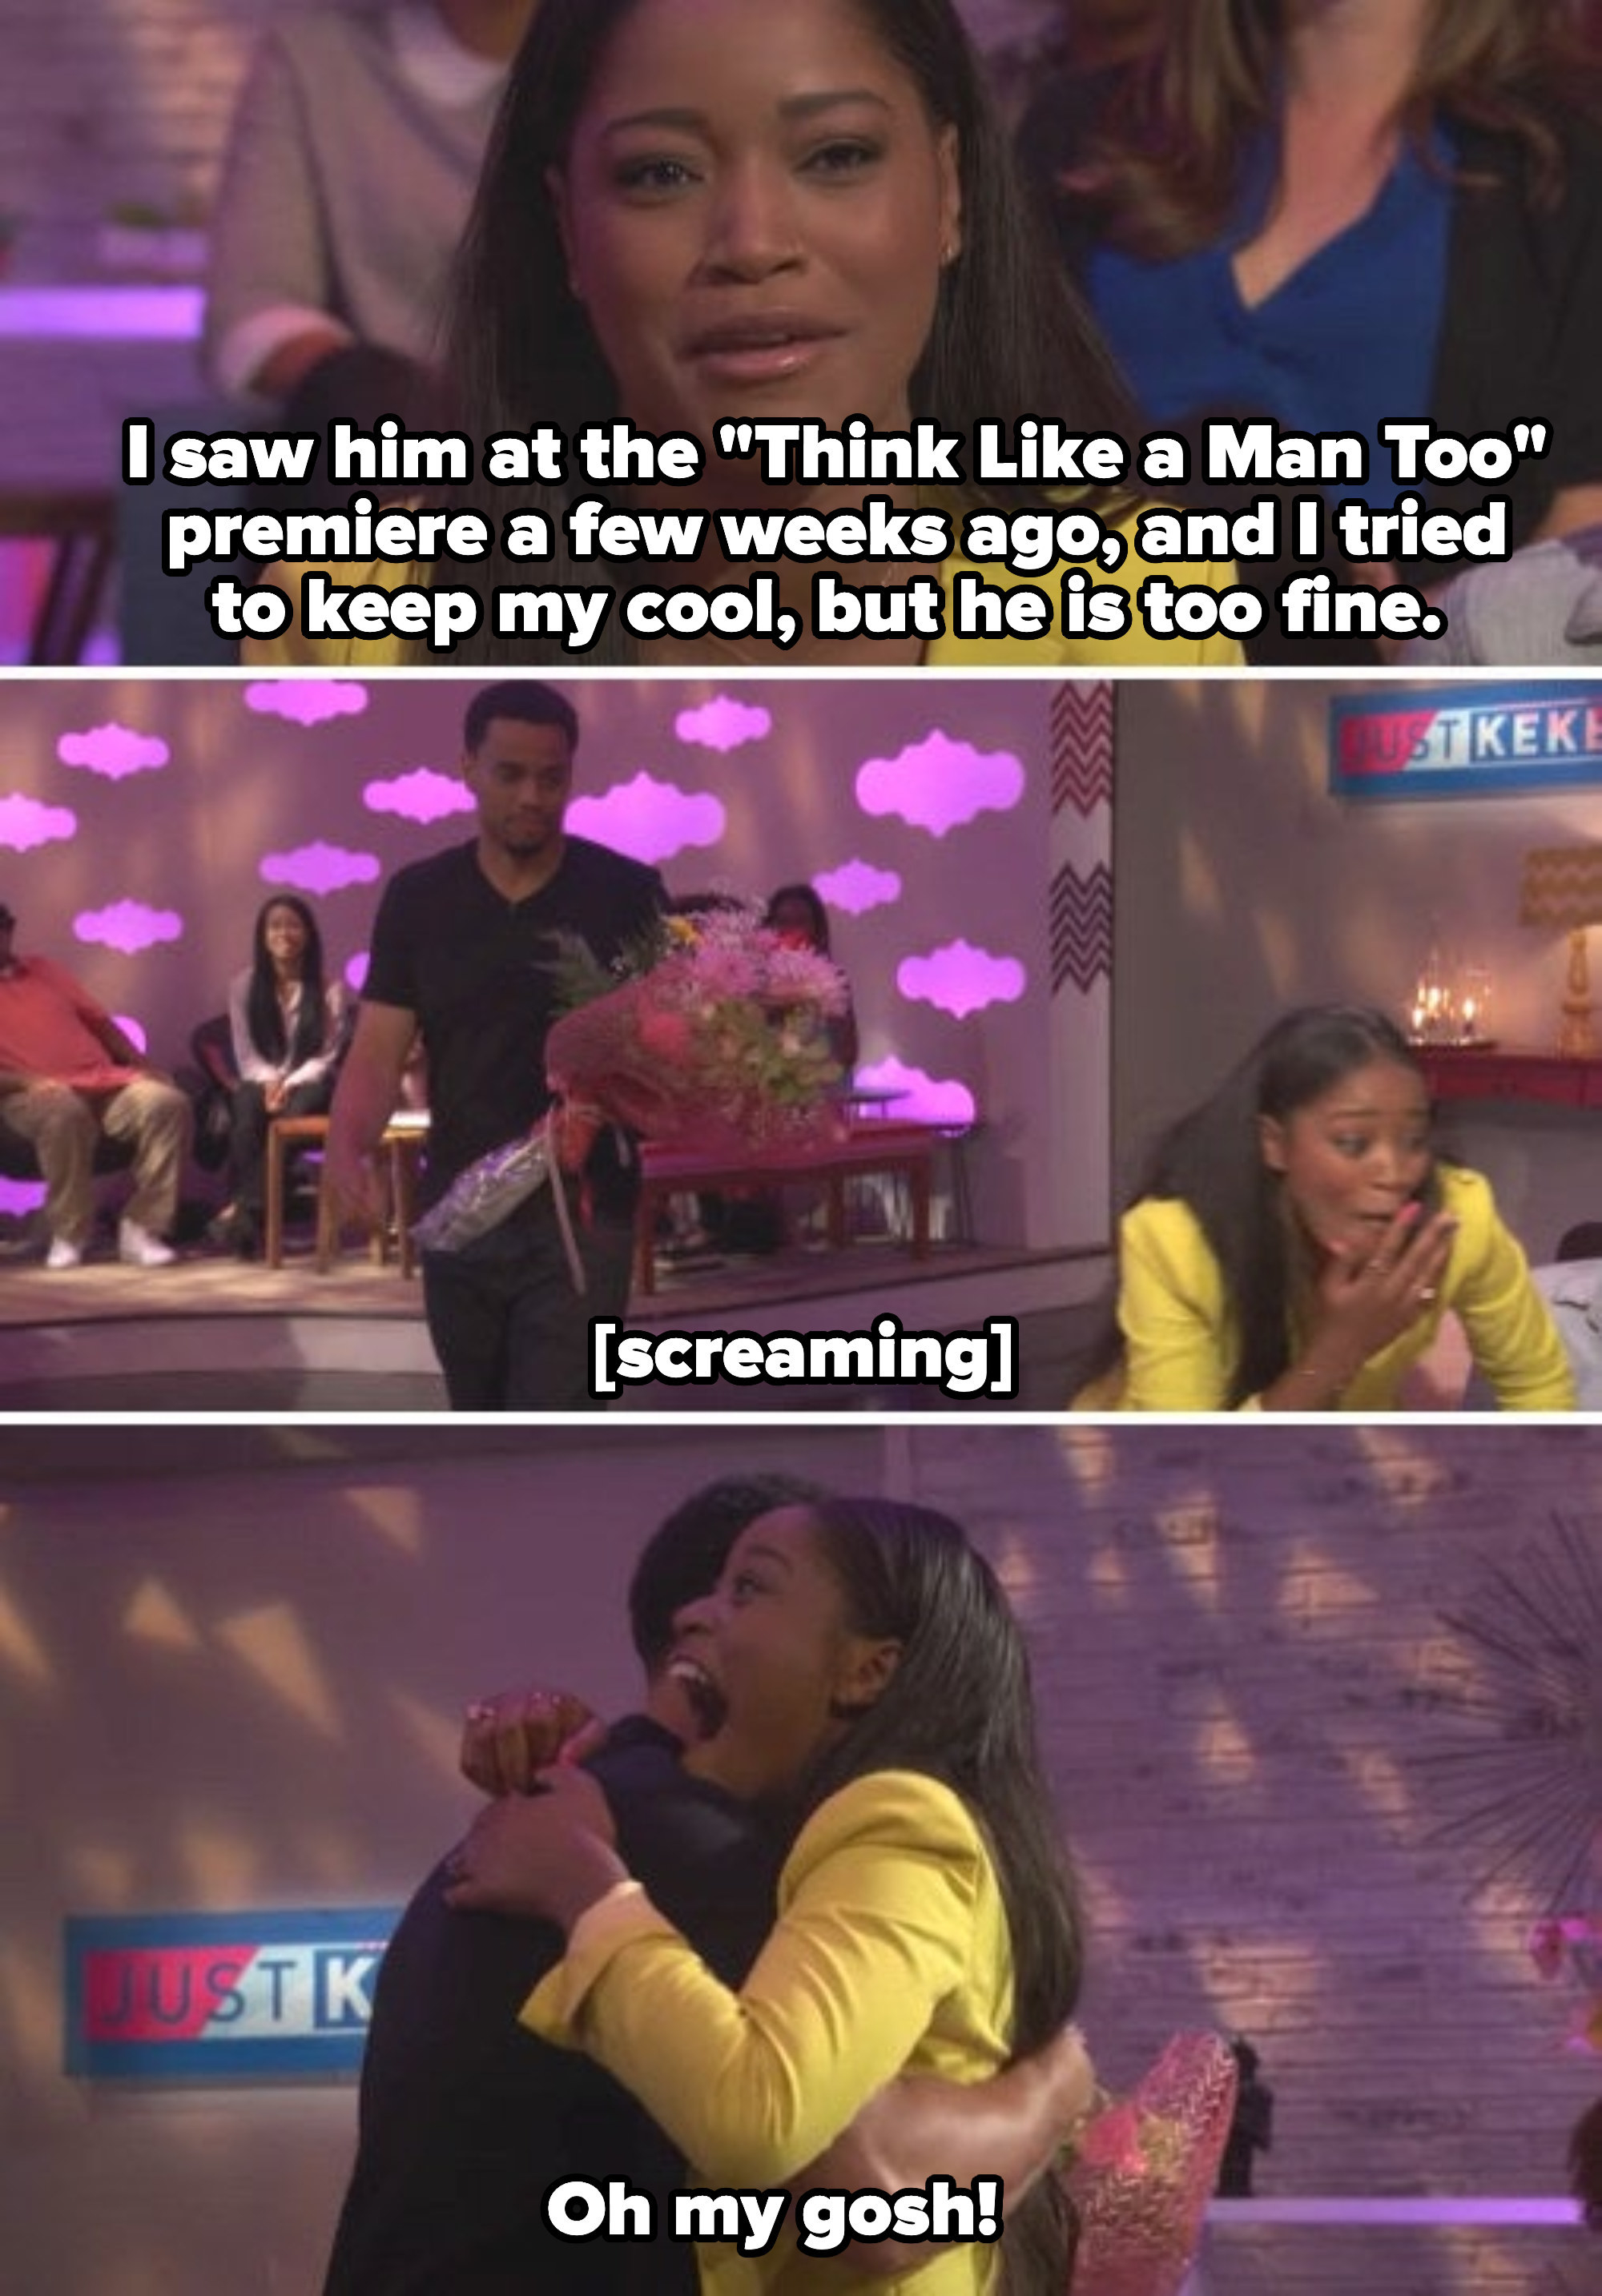 Keke says, &quot;I saw him at the &#x27;Think Like a Man Too&#x27; premiere a few weeks ago, and I tried to keep my cool, but he is too fine&quot; and then screams when she sees Michael appearing with flowers from behind